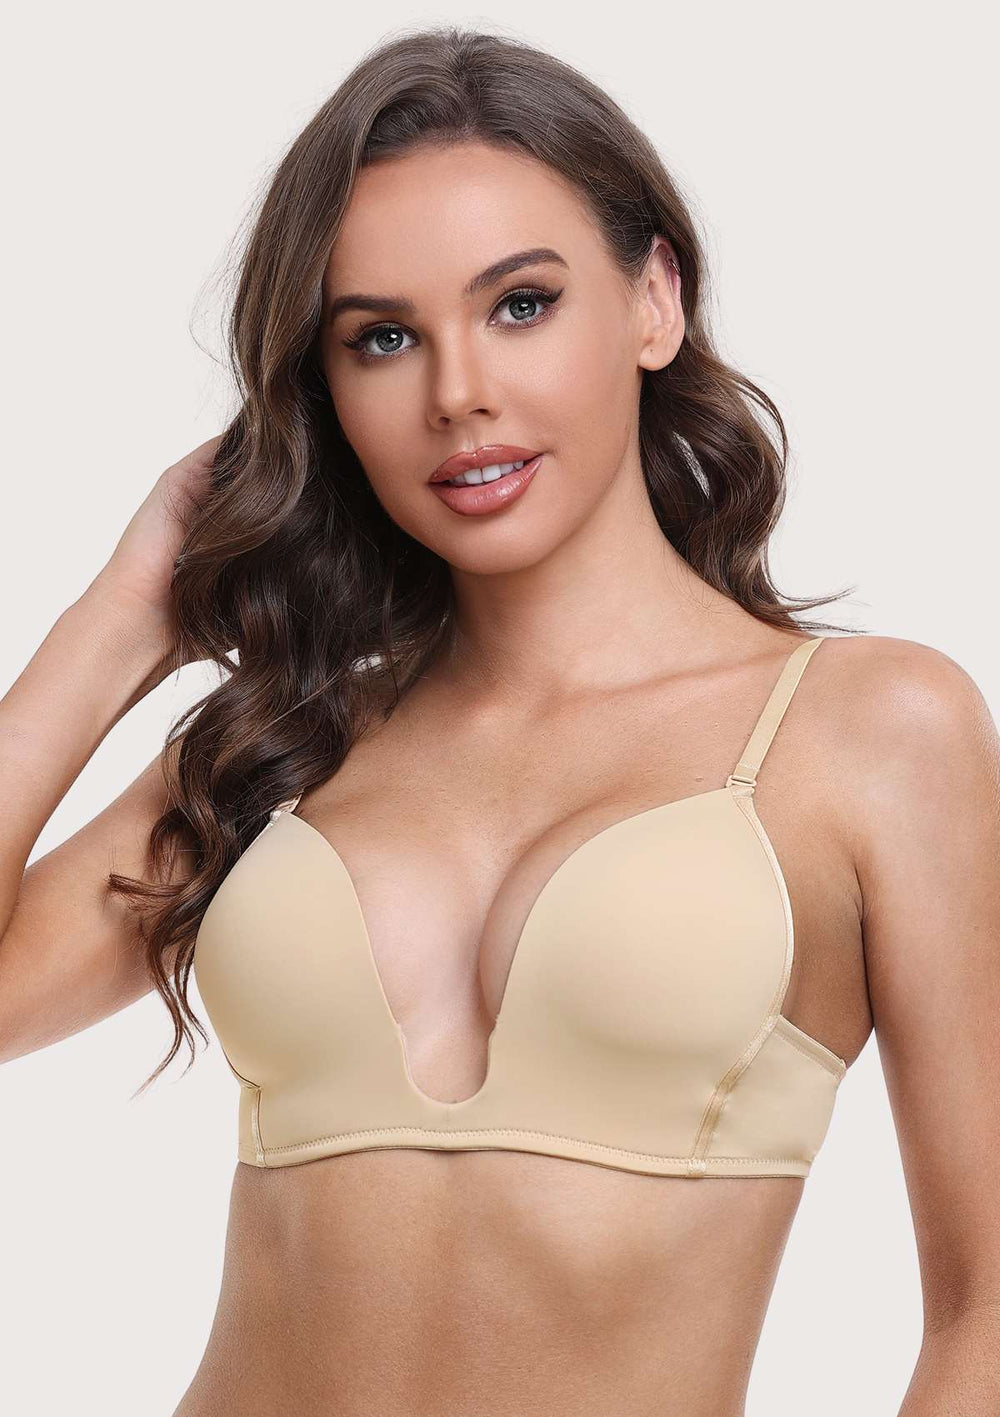 HAOAN Sexy Backless Strapless Bra Push Up Plus Size Bras For Women